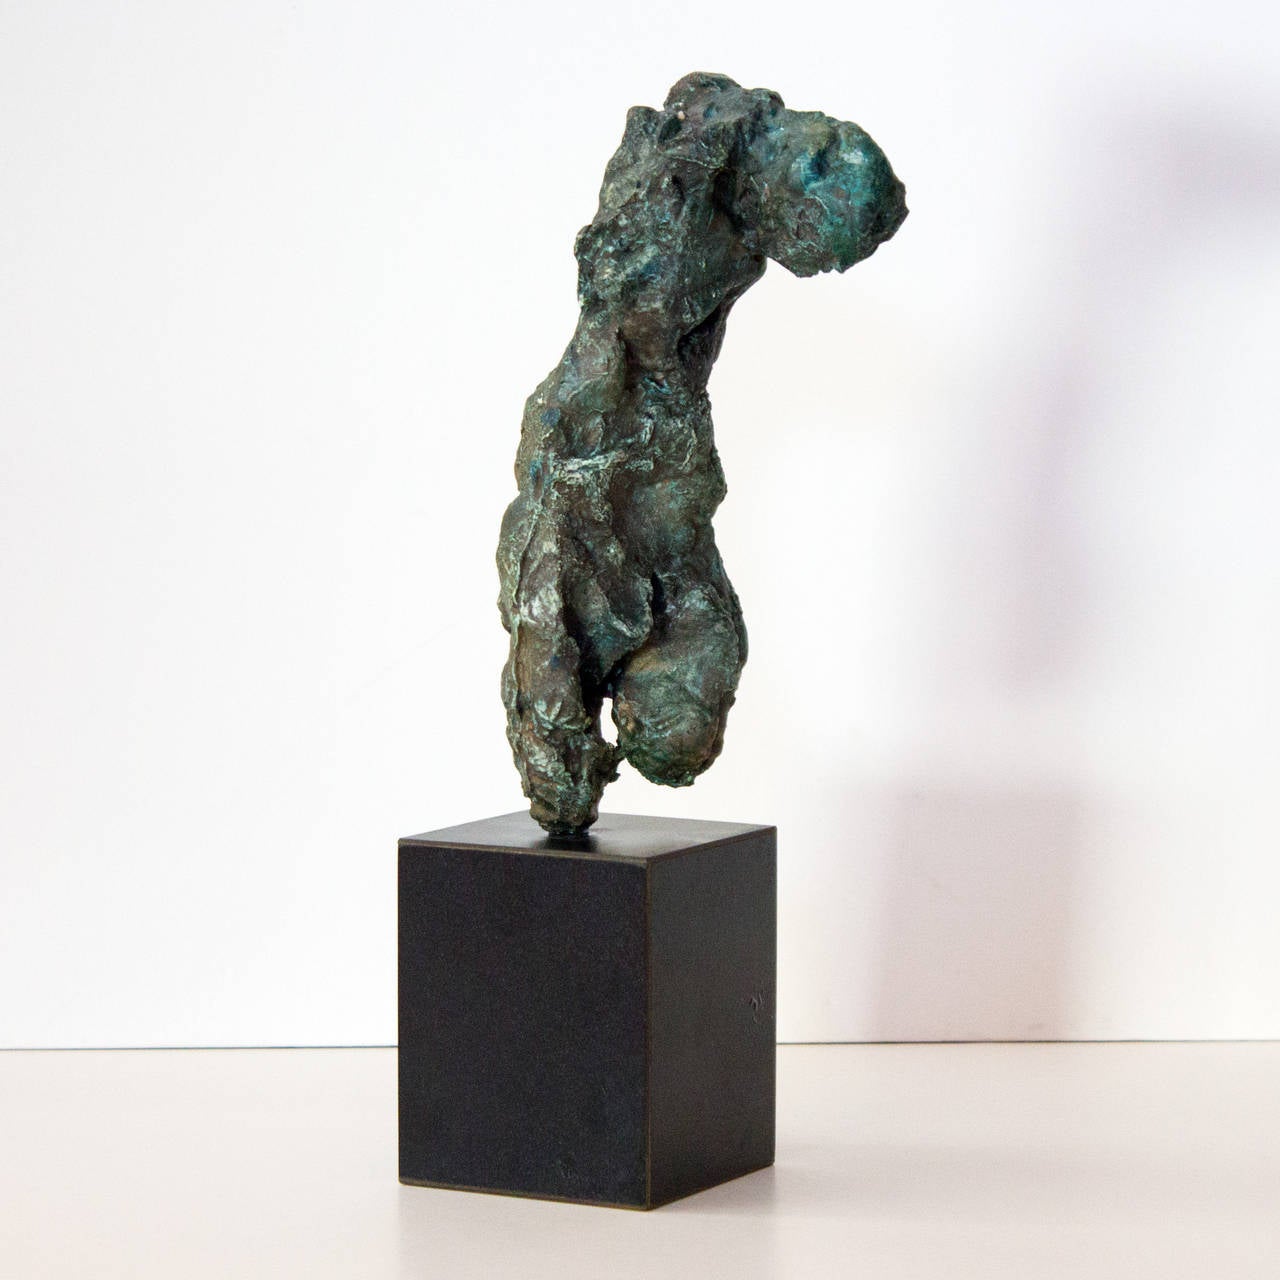 A small plaster sculpture of a partial human figure by New York artist Auguste Garufi. Composed of plaster and pigment and mounted on a black base.